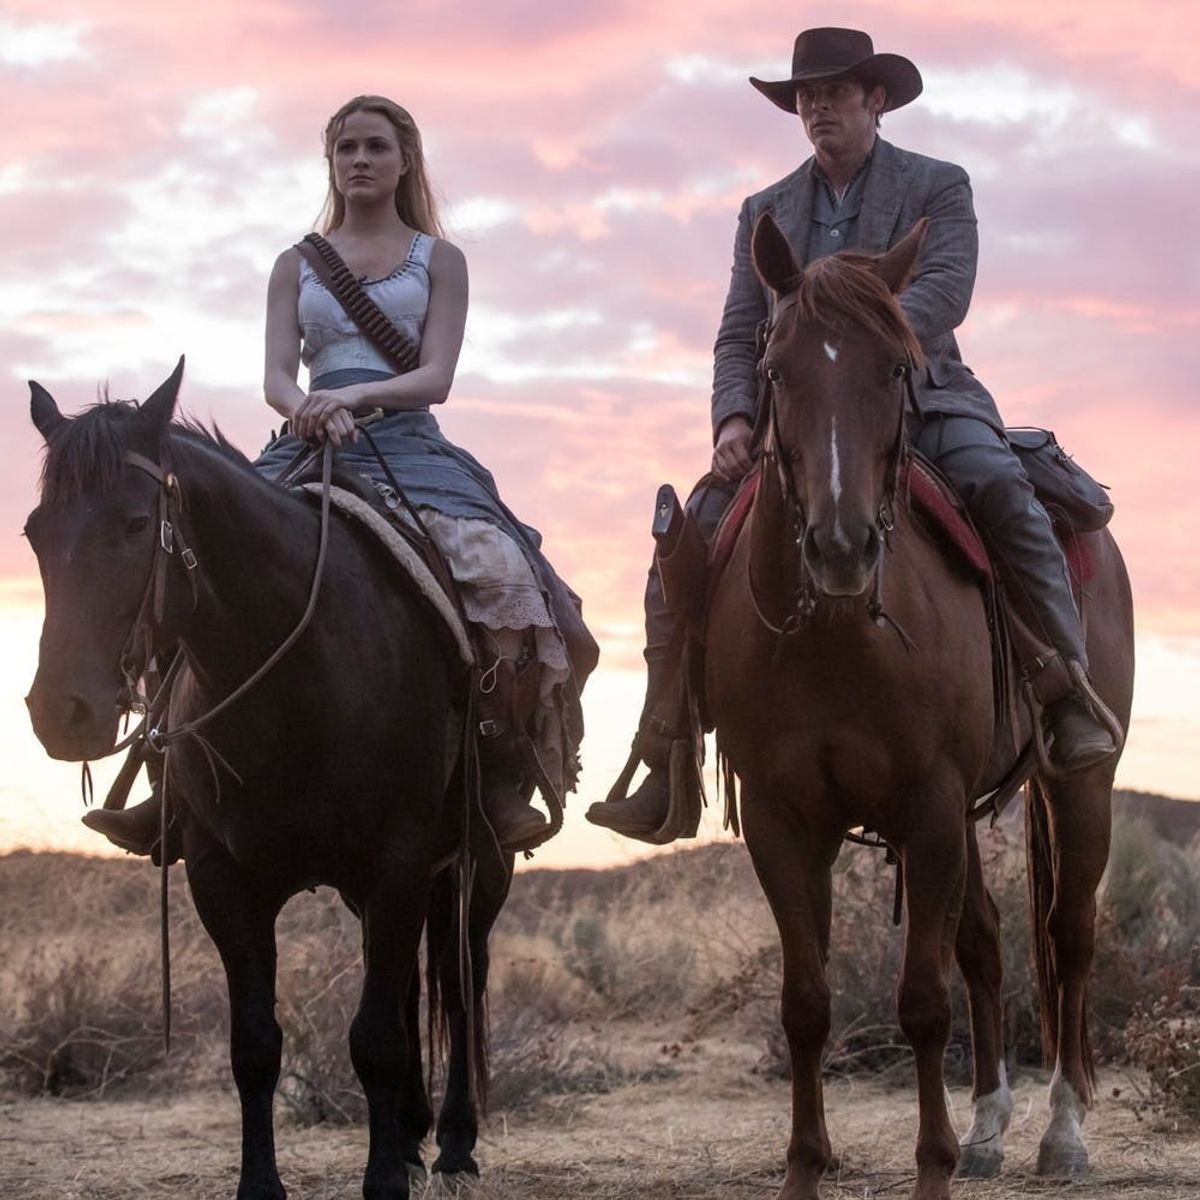 7 Locations You Can Visit to Experience ‘Westworld’ in Real Life